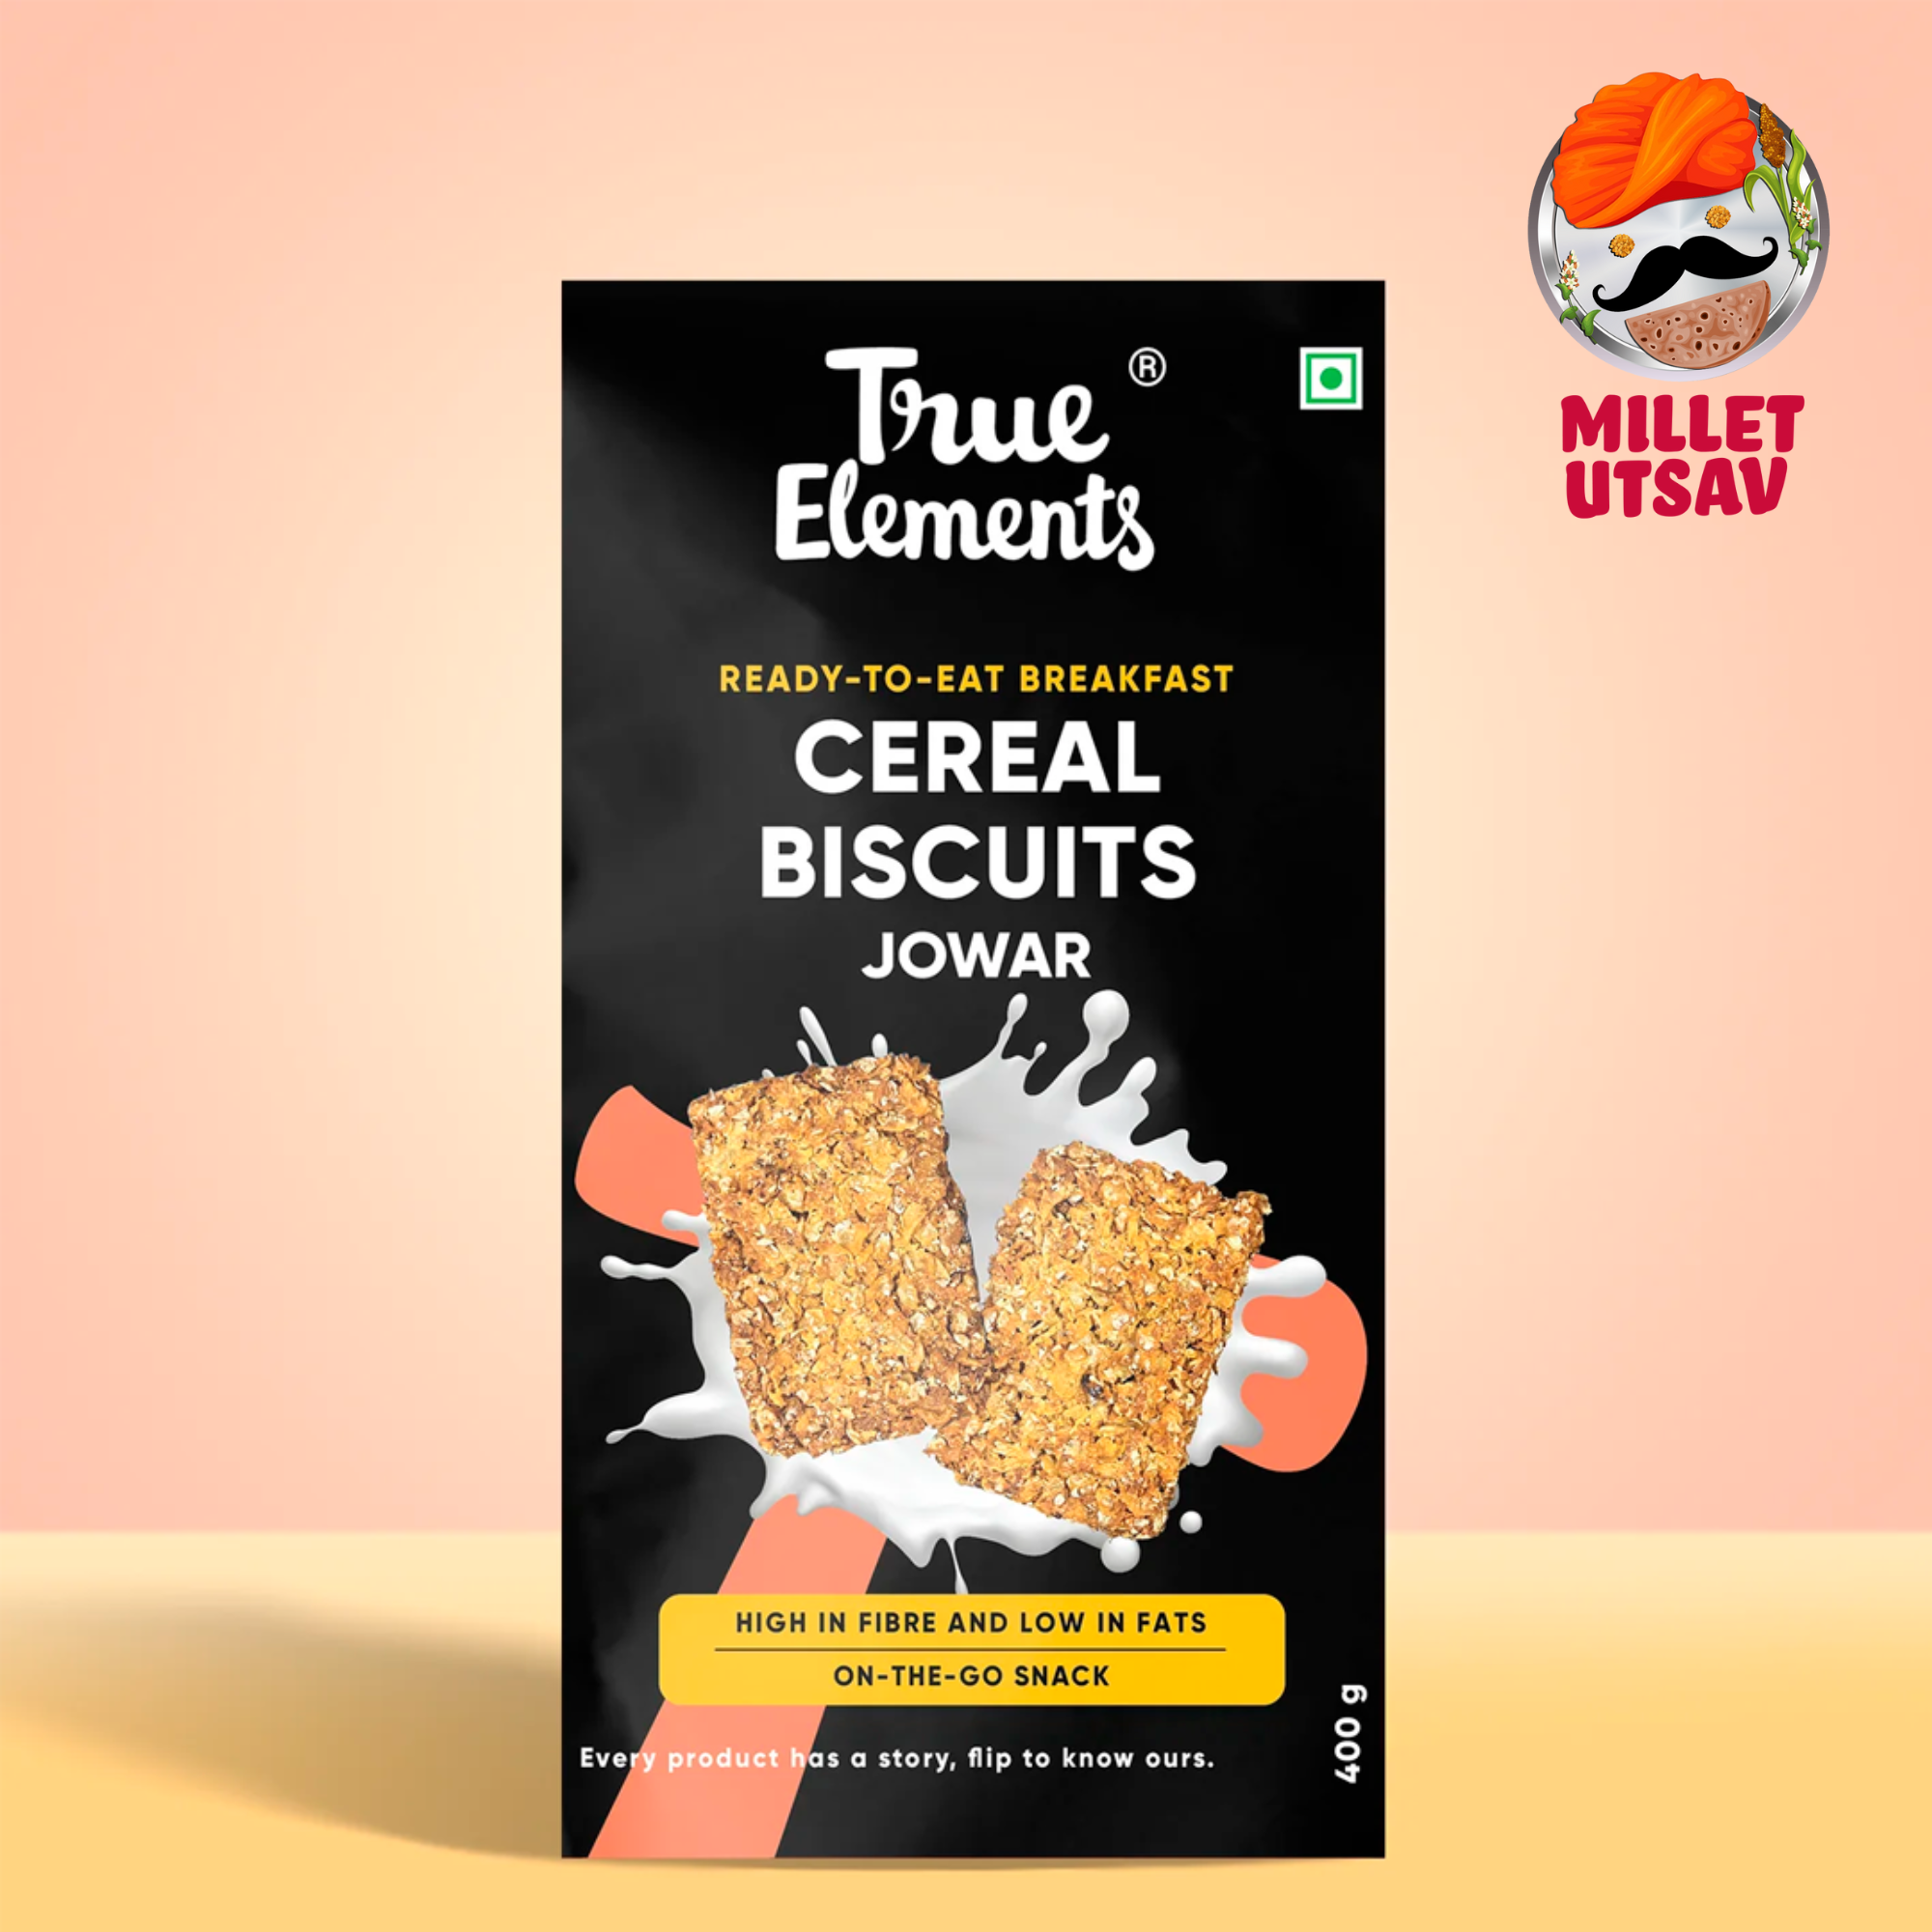 True-Elements-Jowar-Cereal-Biscuits-India's-First-Cereal-Biscuits